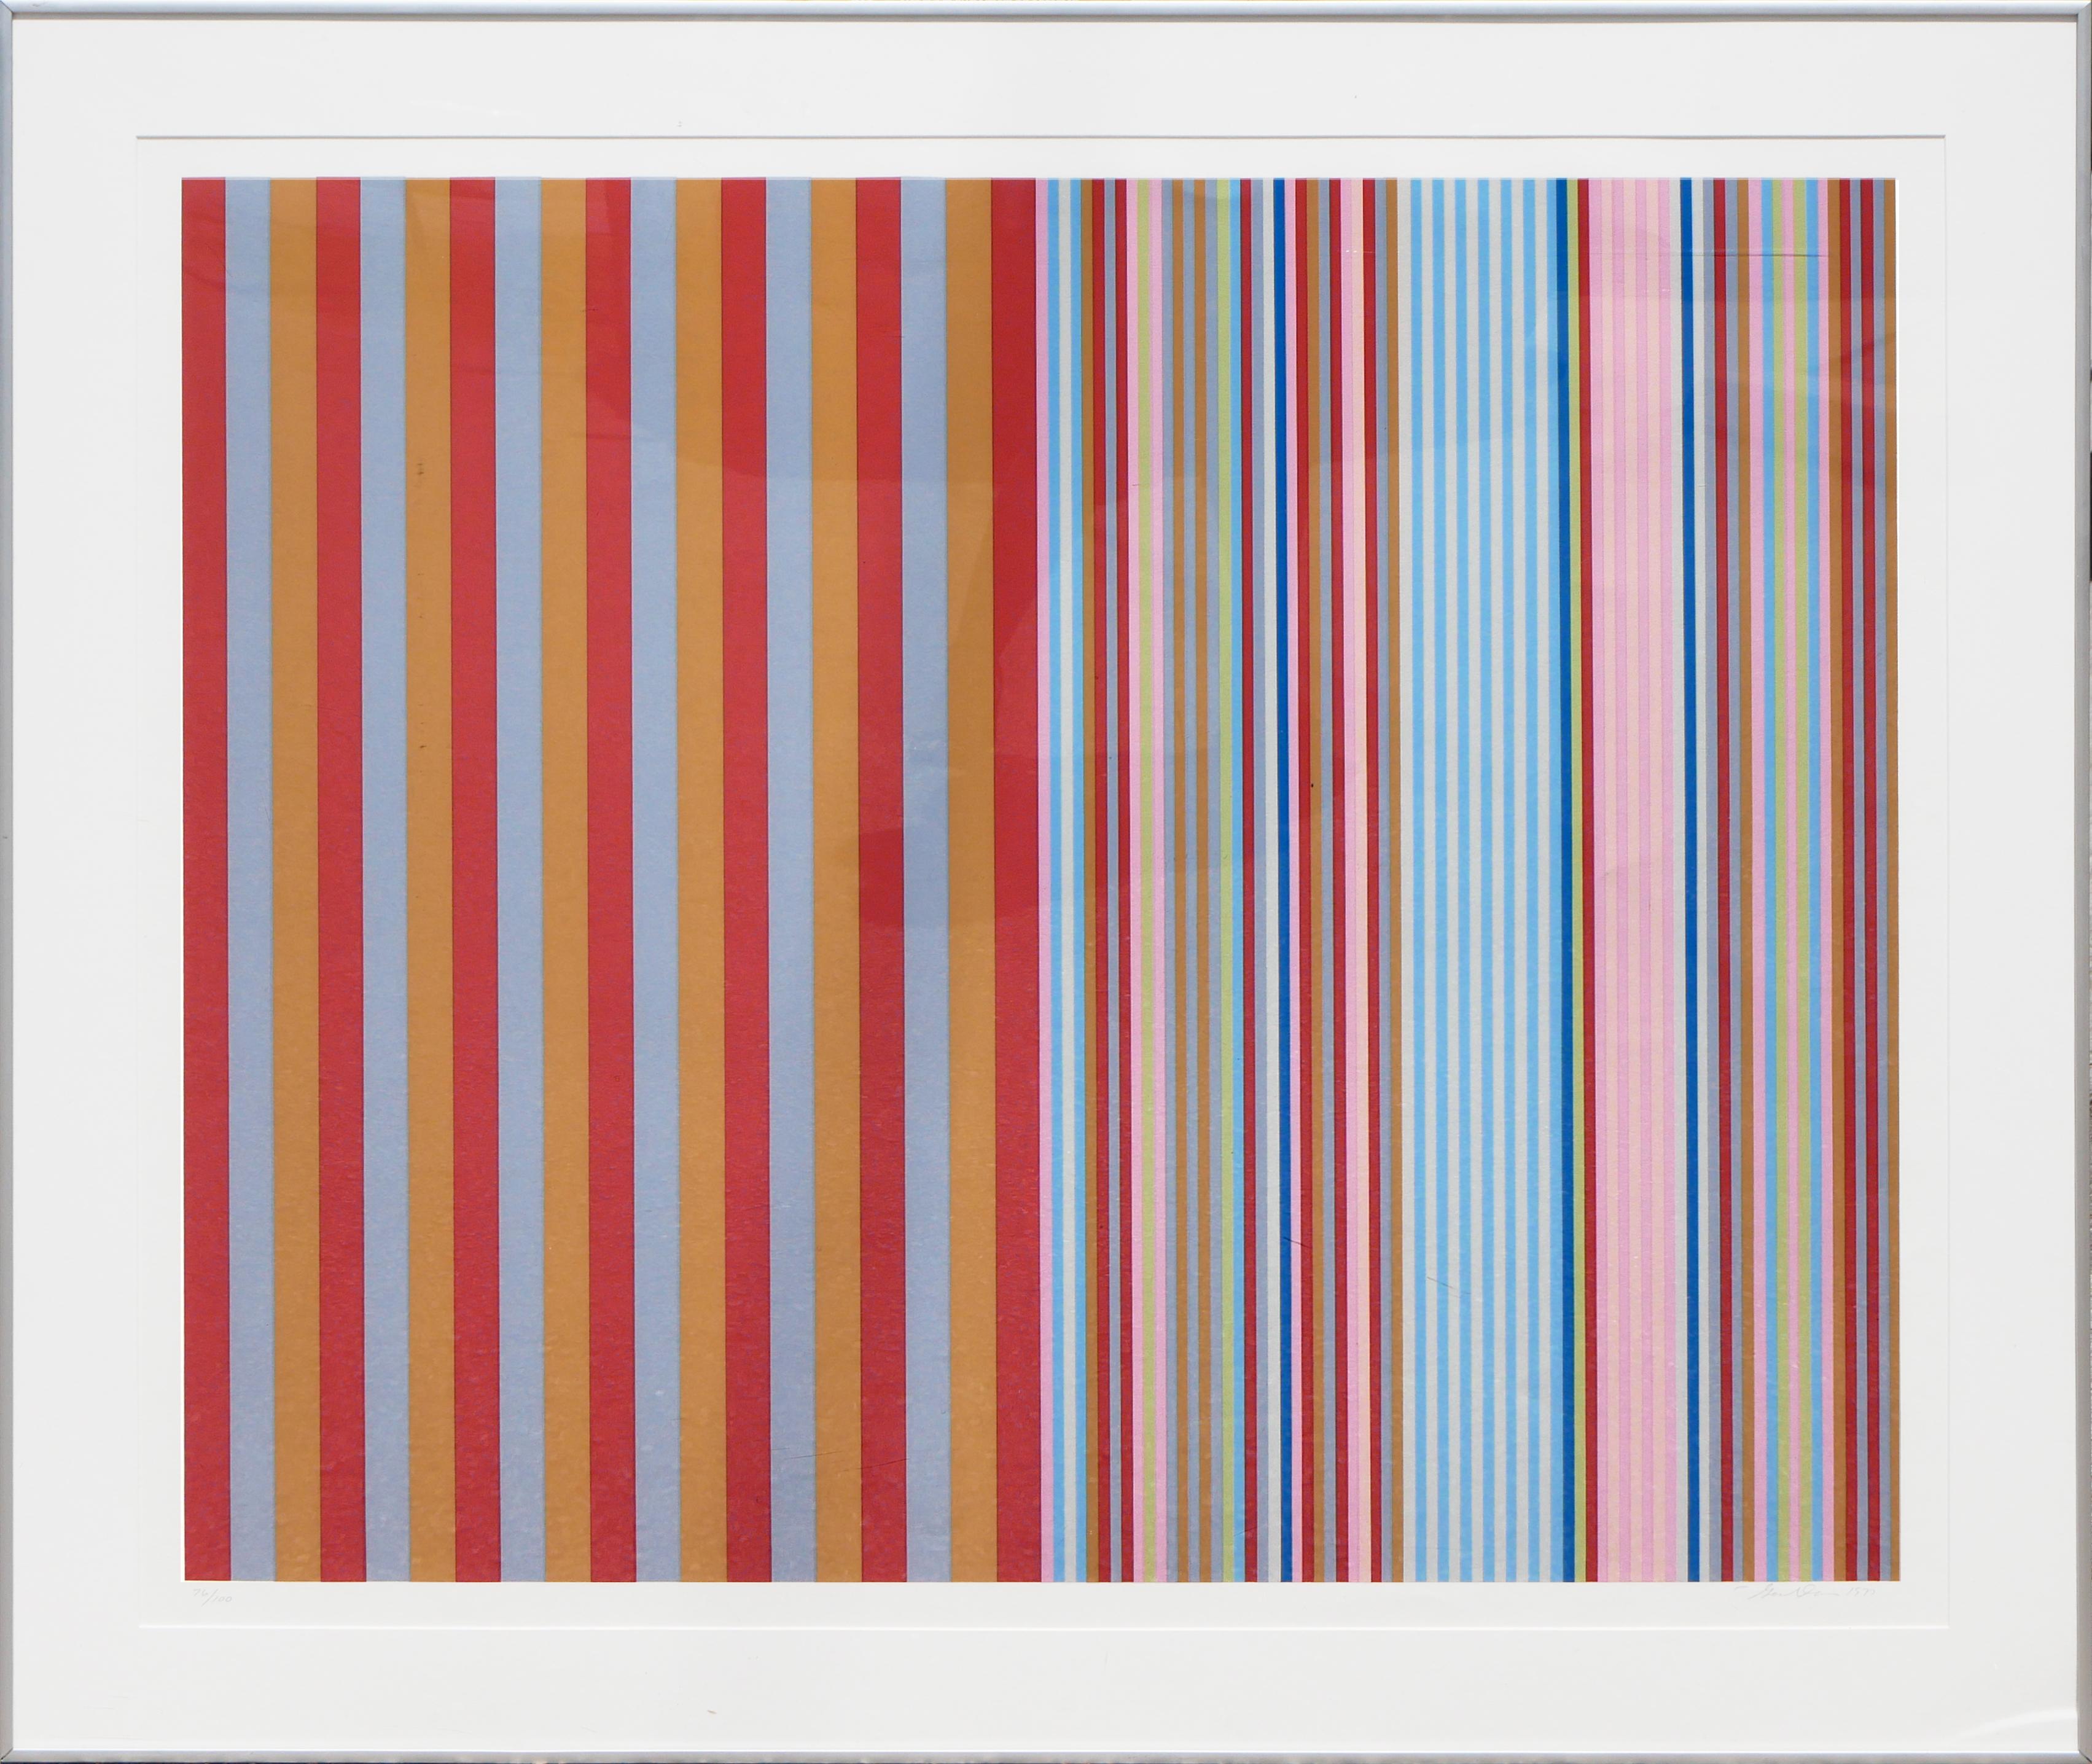 Gene Davis Abstract Print - "Royal Canoe" Colorful Striped Geometric Abstract Lithograph